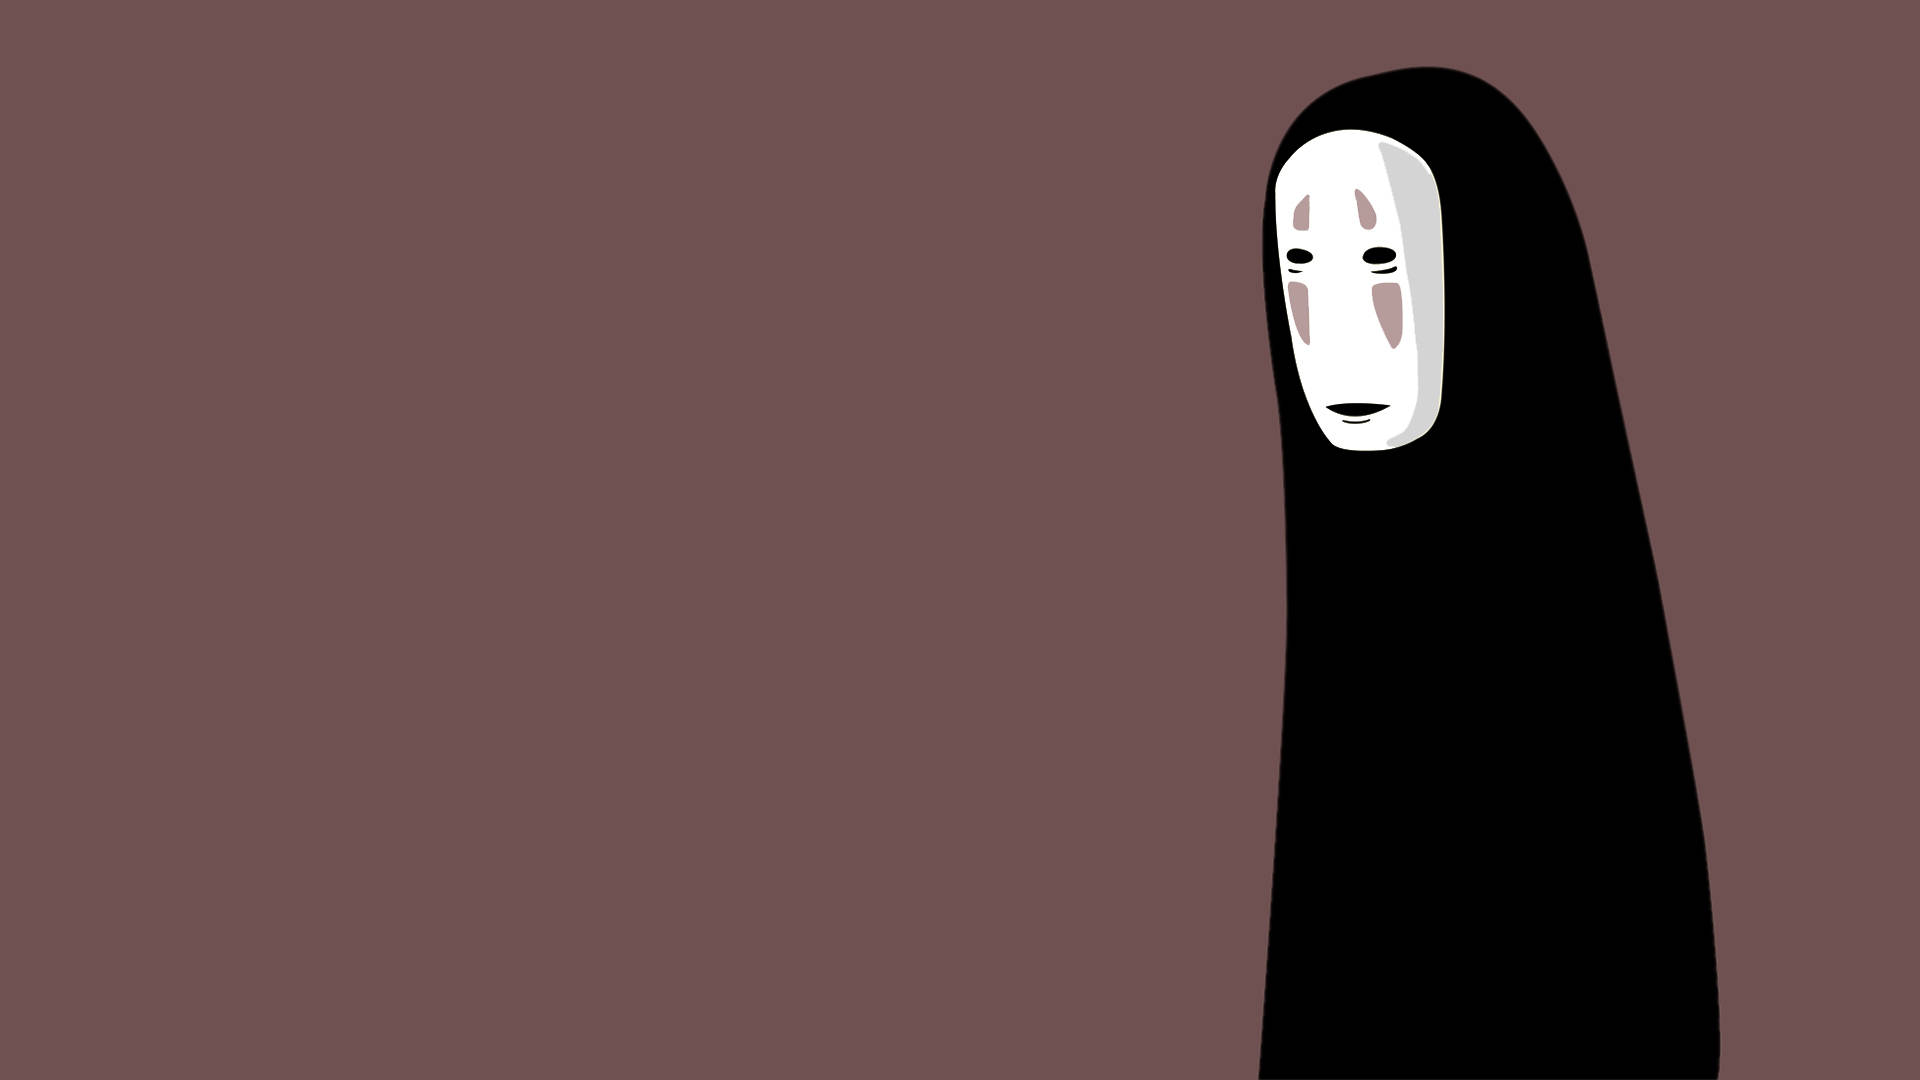 (note: No-face Is A Character From The Japanese Animated Film 